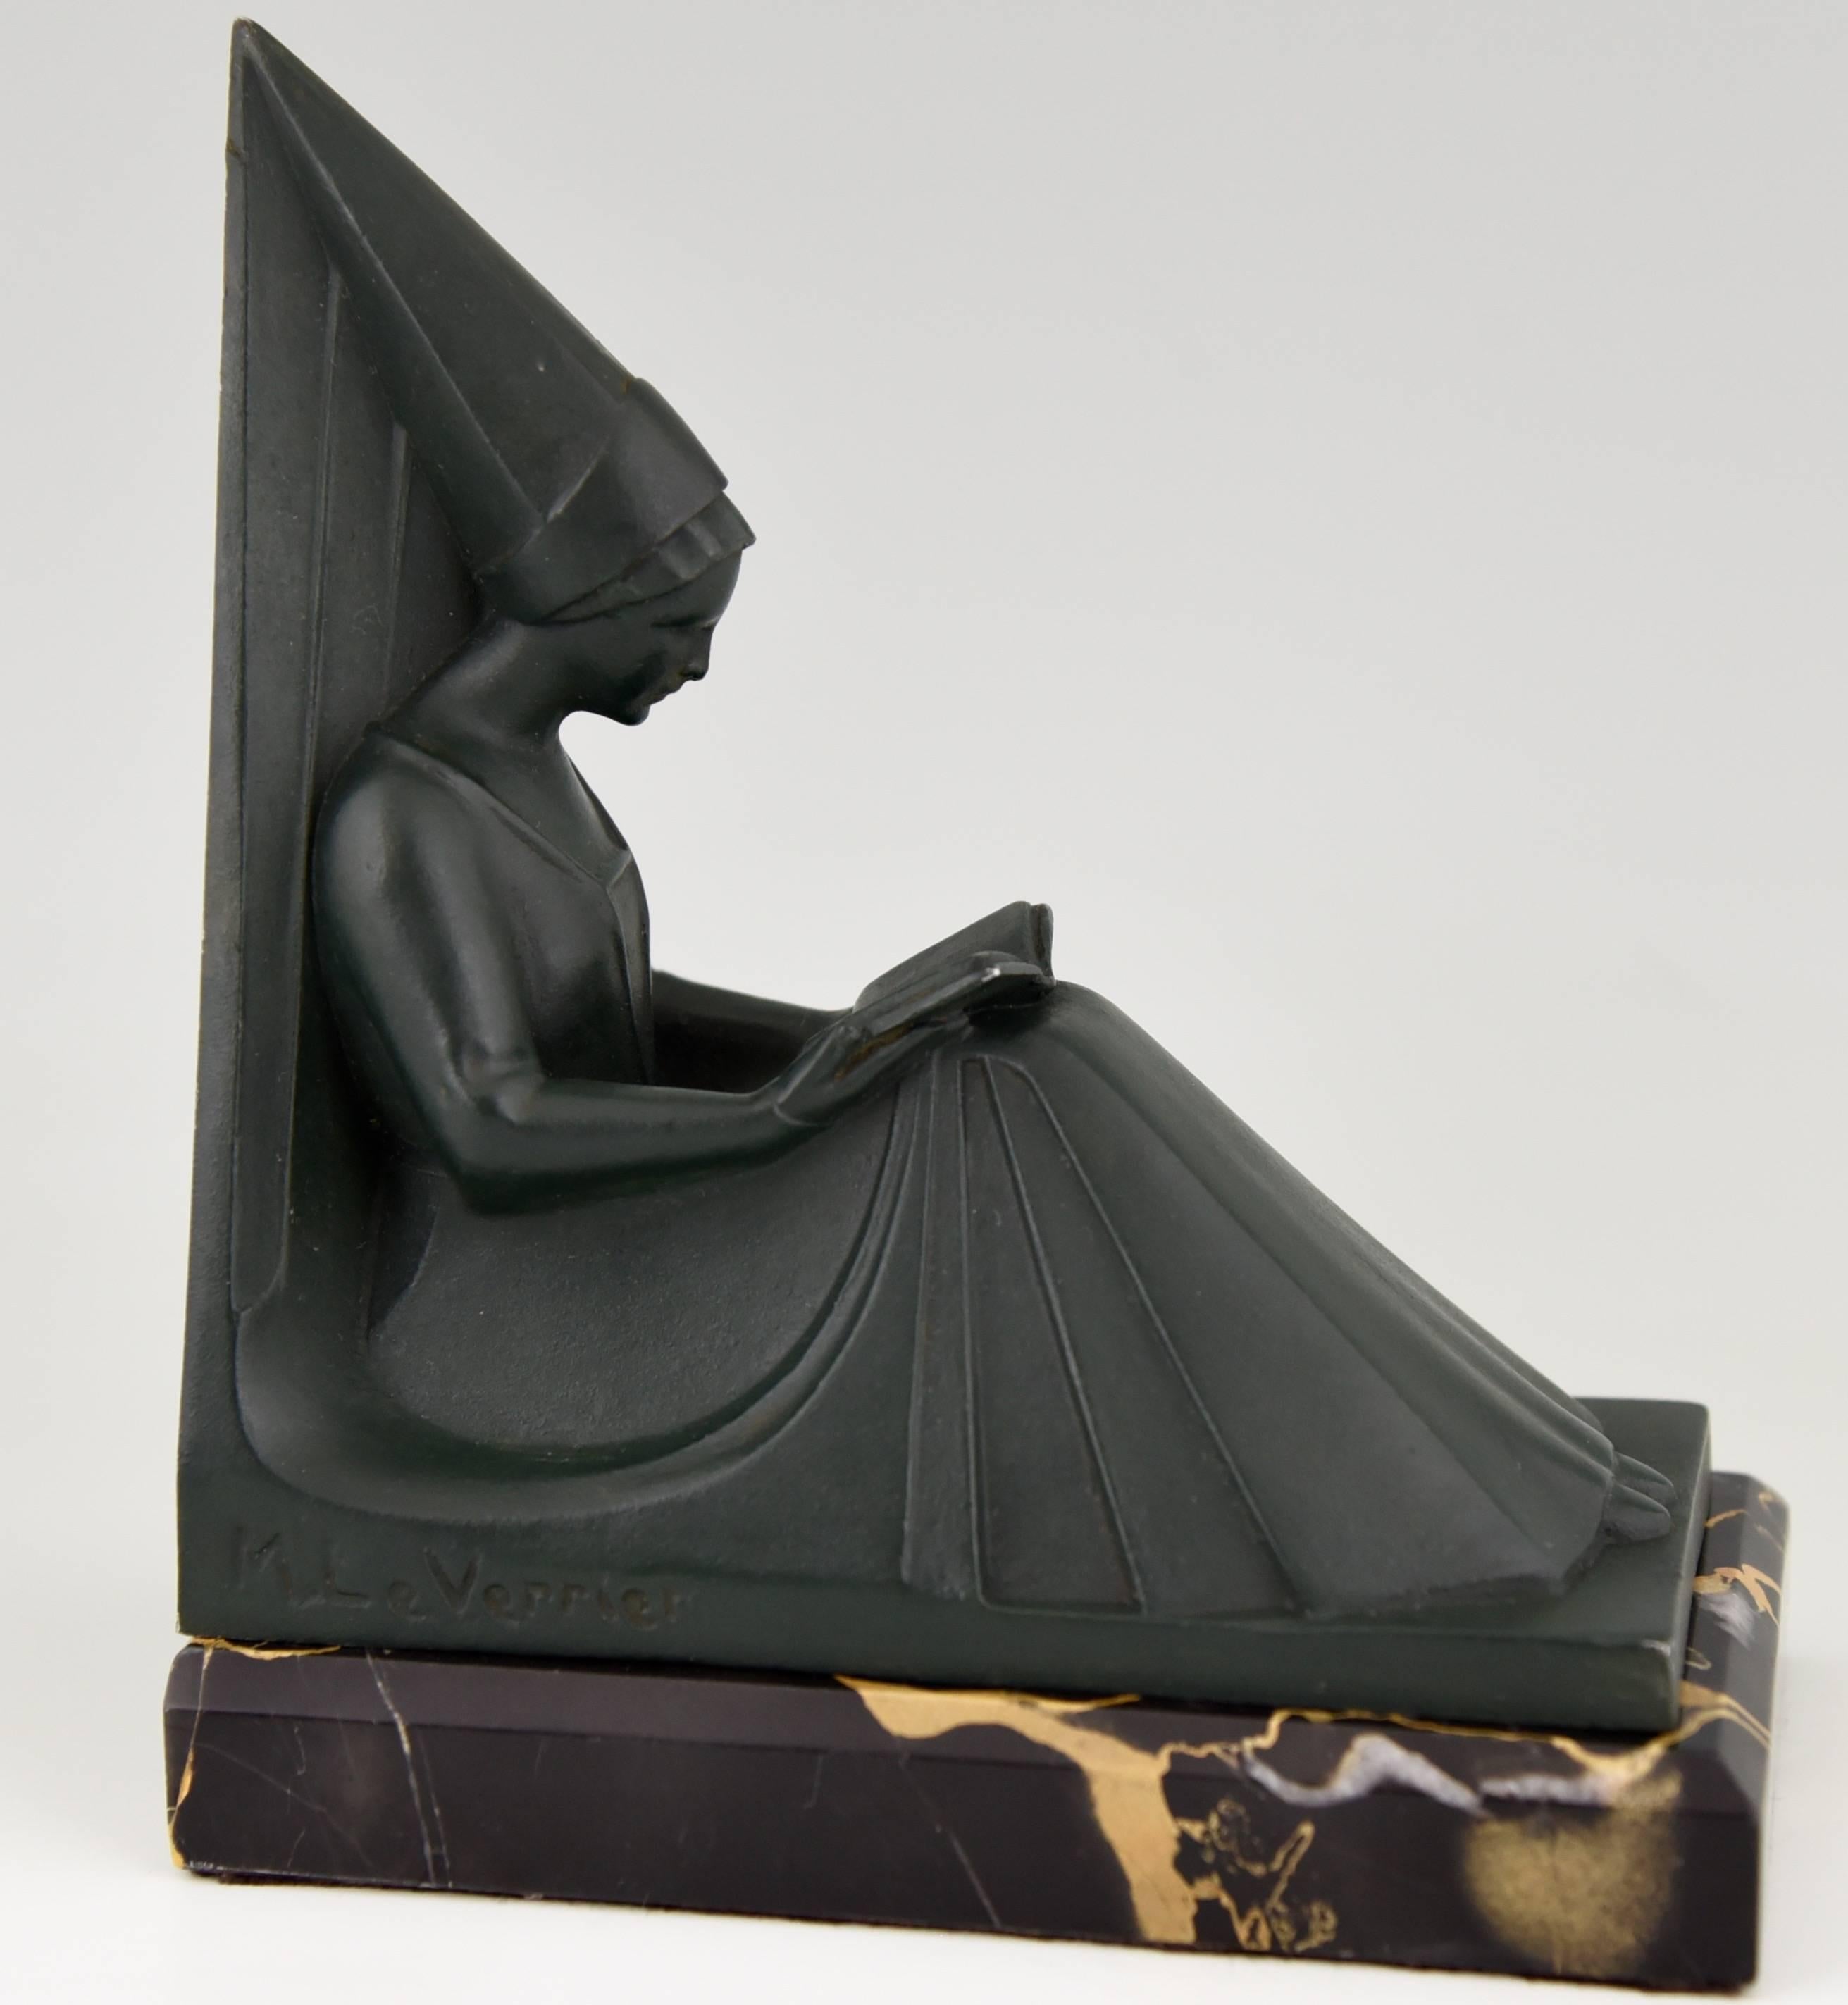 Marble French Art Deco Bookends Reading Ladies by Max Le Verrier, 1930